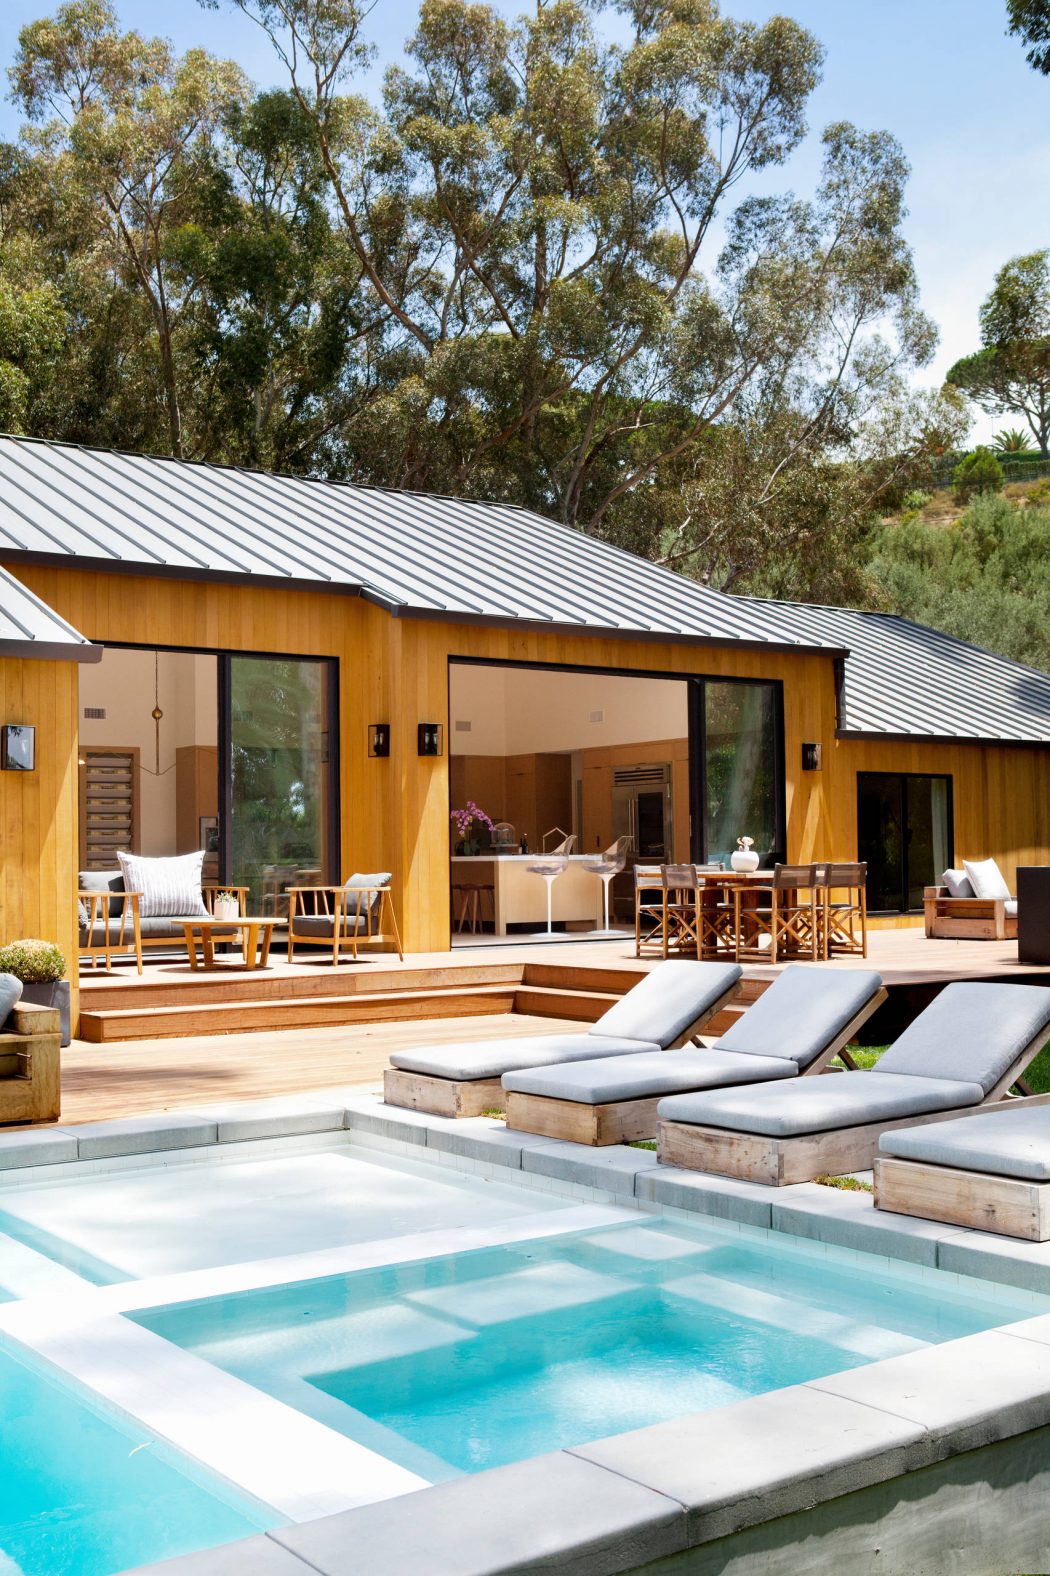 Modern wooden cabin with a sleek metal roof, surrounded by lush greenery and a tranquil pool.